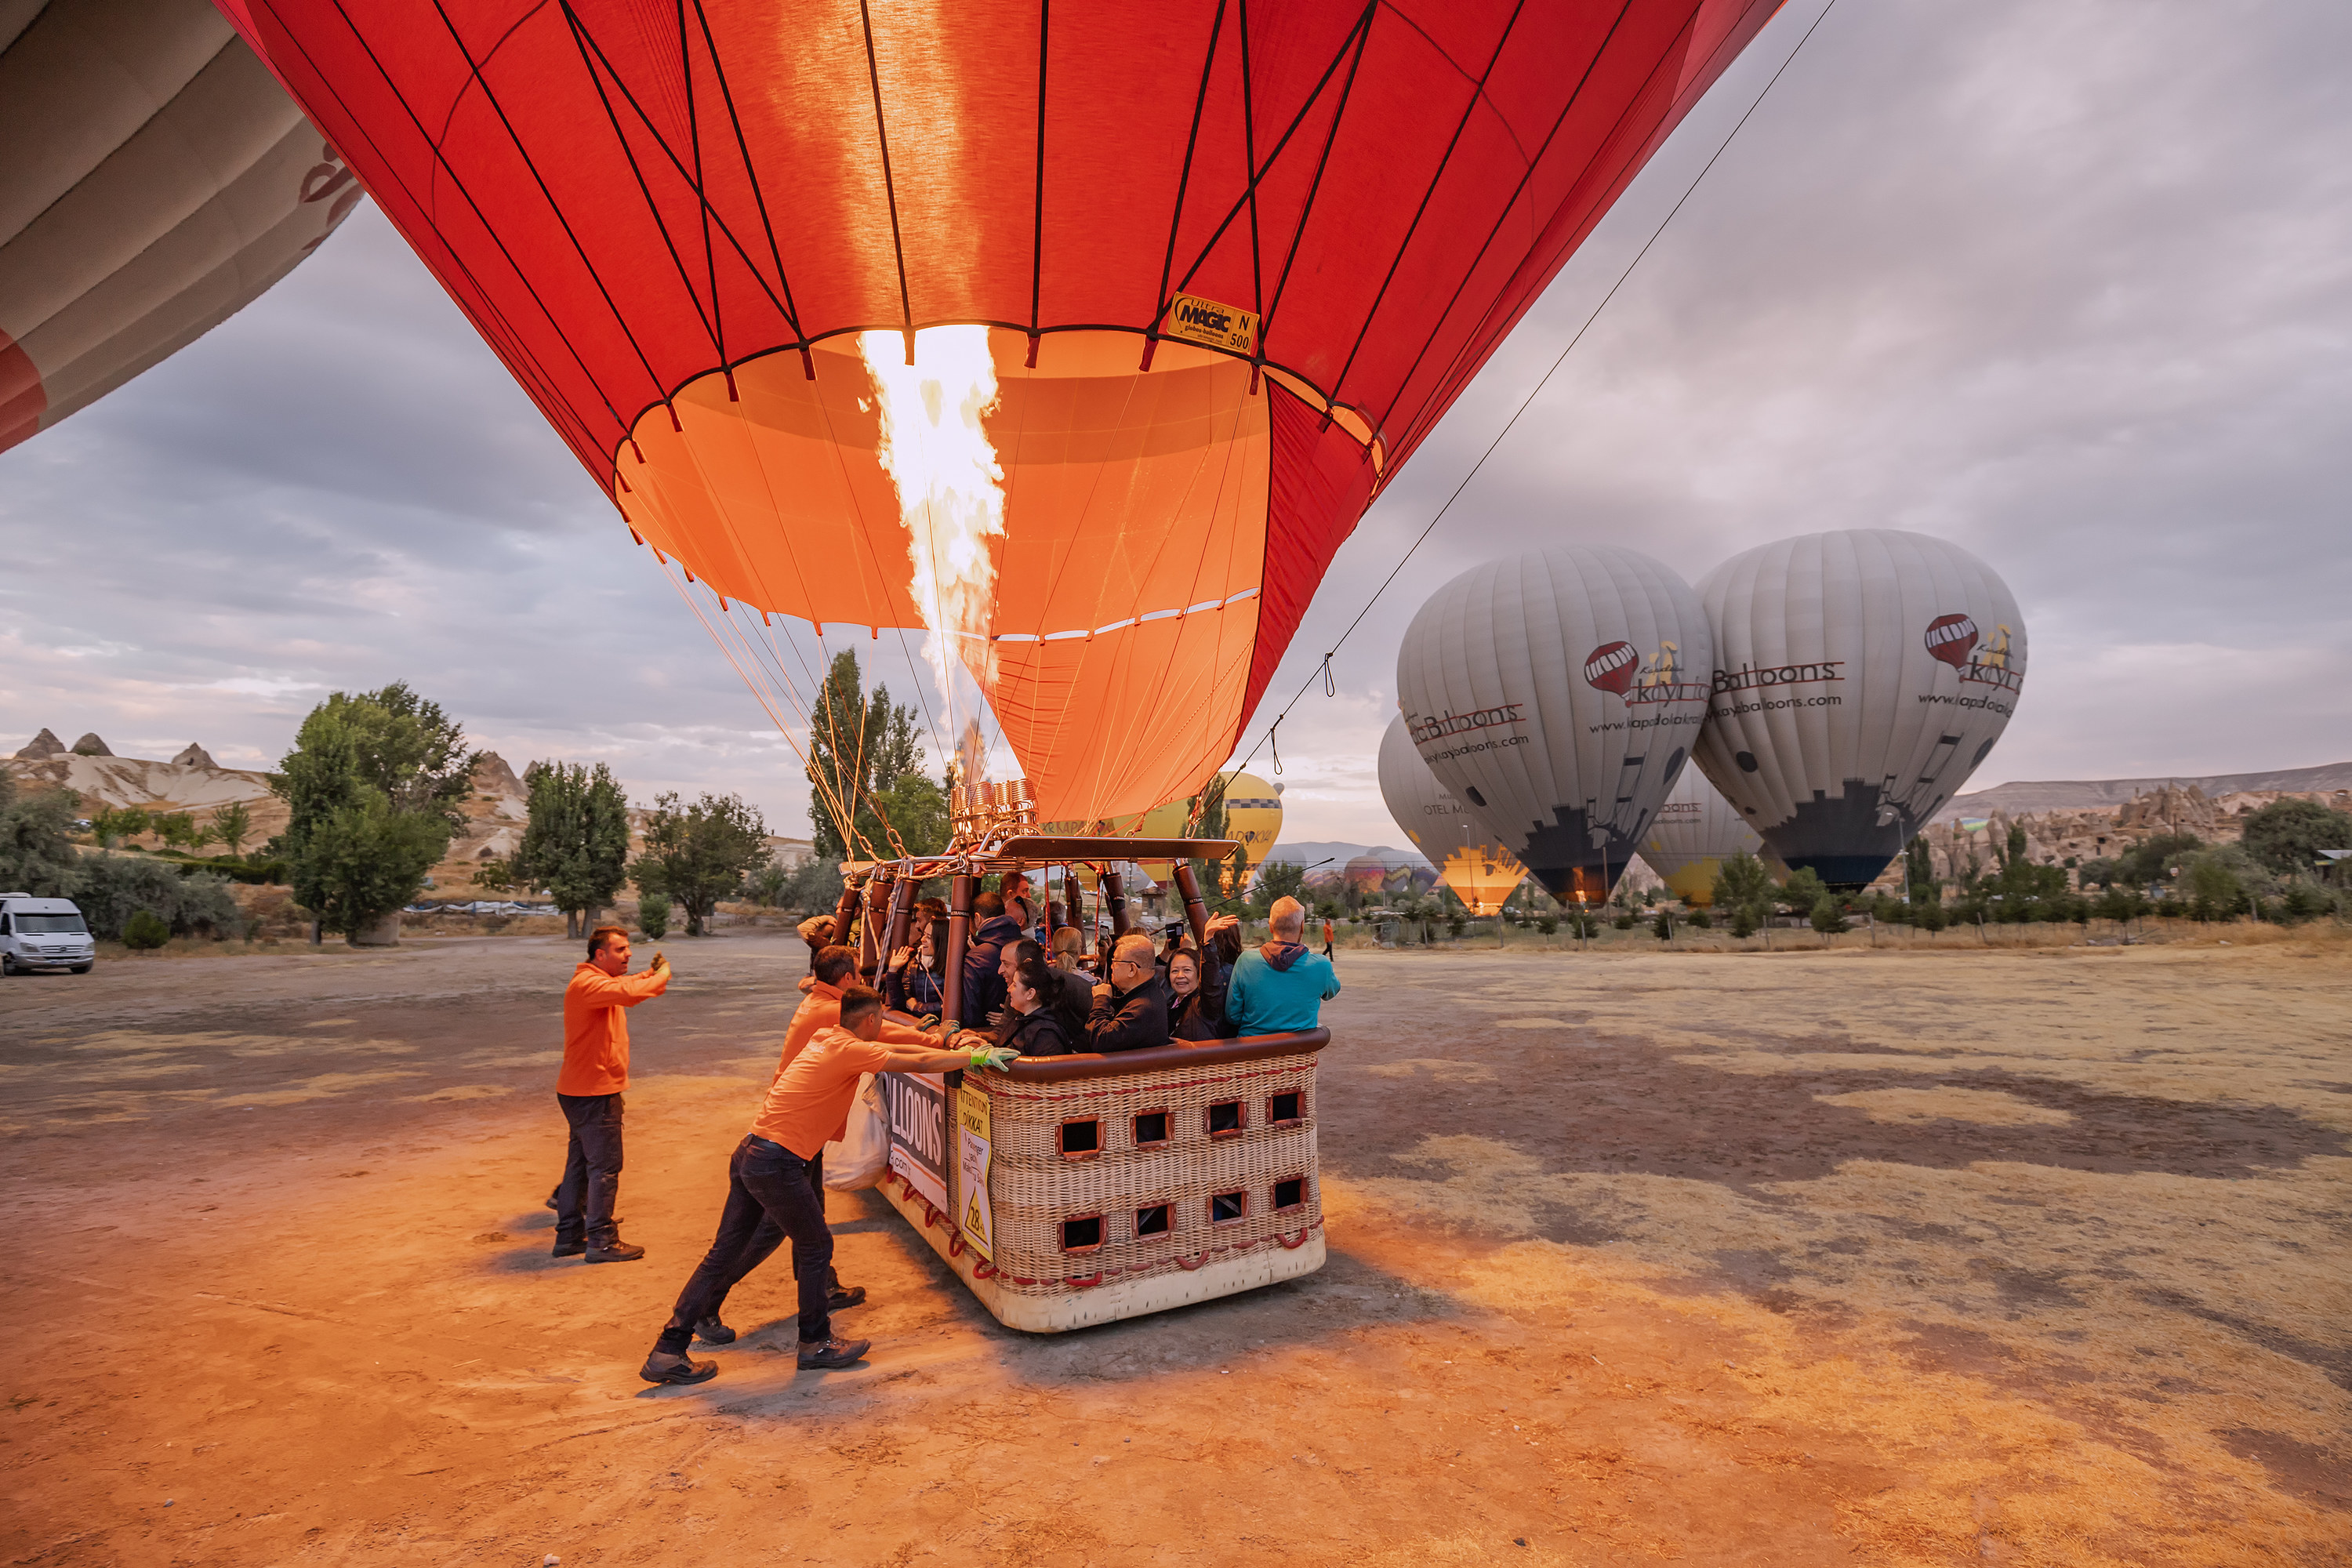 People getting a hot-air balloon ready for takeoff